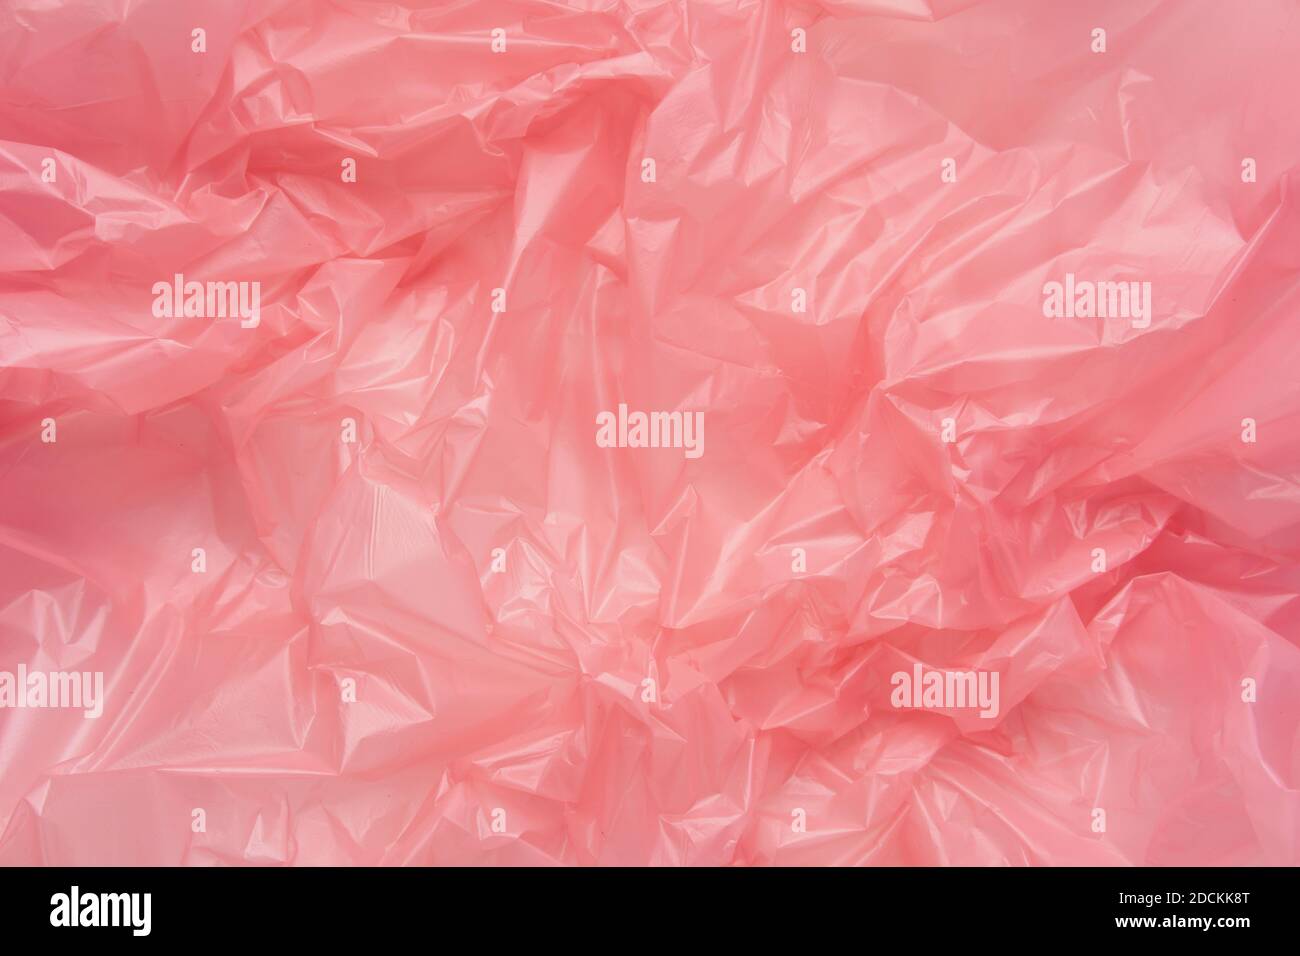 Close up Texture of a Pink Plastic garbage Bag. Polyethylene Film Stock Photo